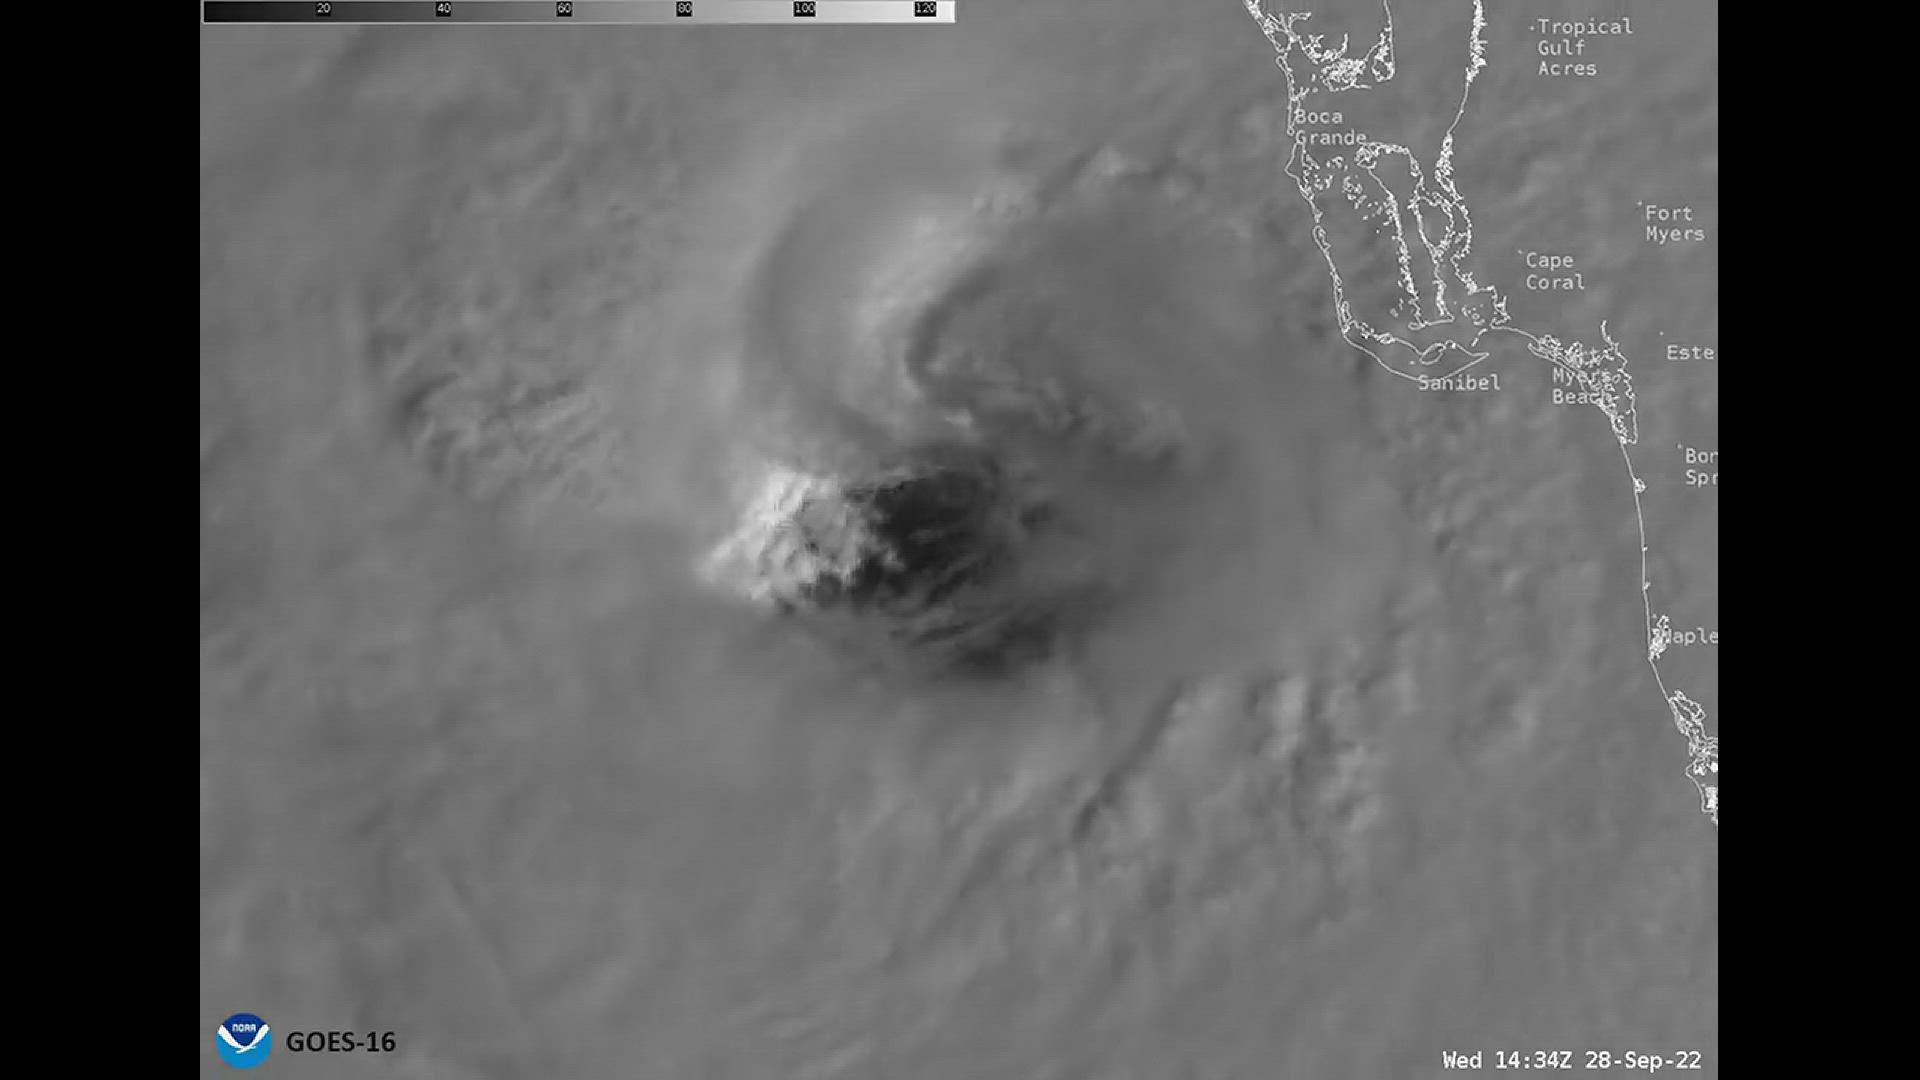 NOAA's GOES-16 satellite captured this image of the inside of Hurricane Ian's eye as the storm approached Florida.